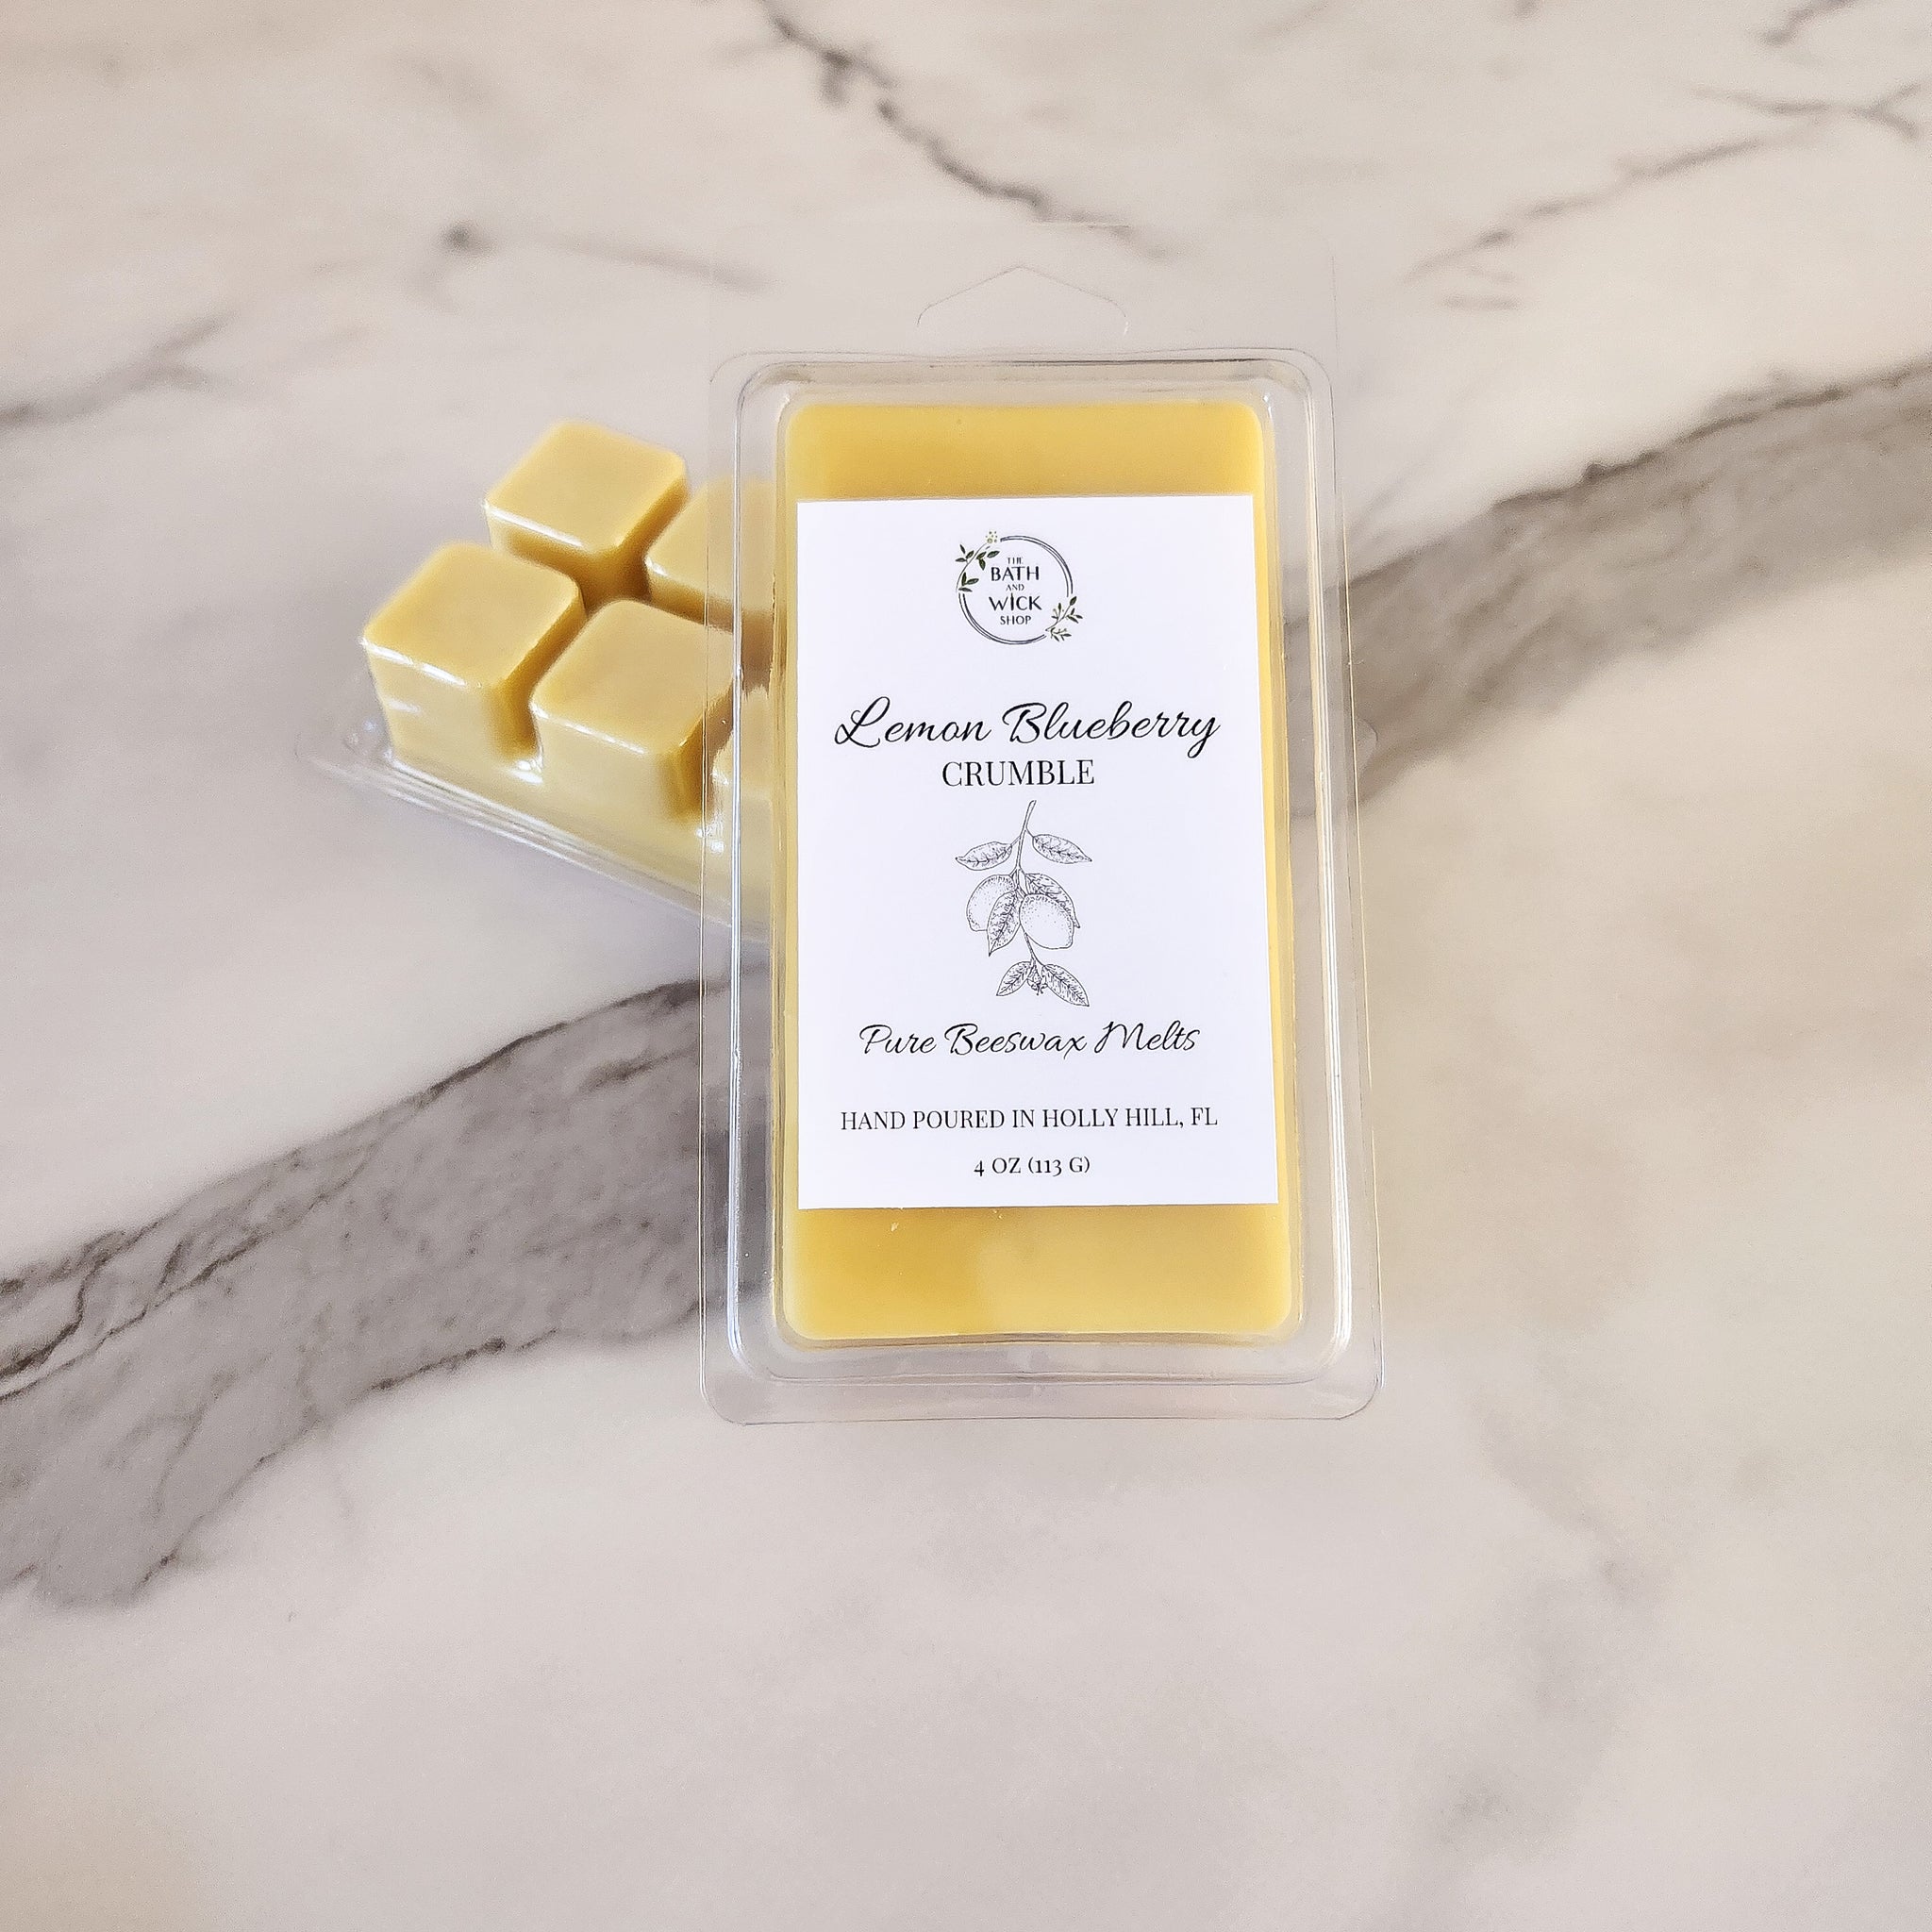 Lemon Blueberry Crumble Pure Beeswax Melts | Large 8 Cube